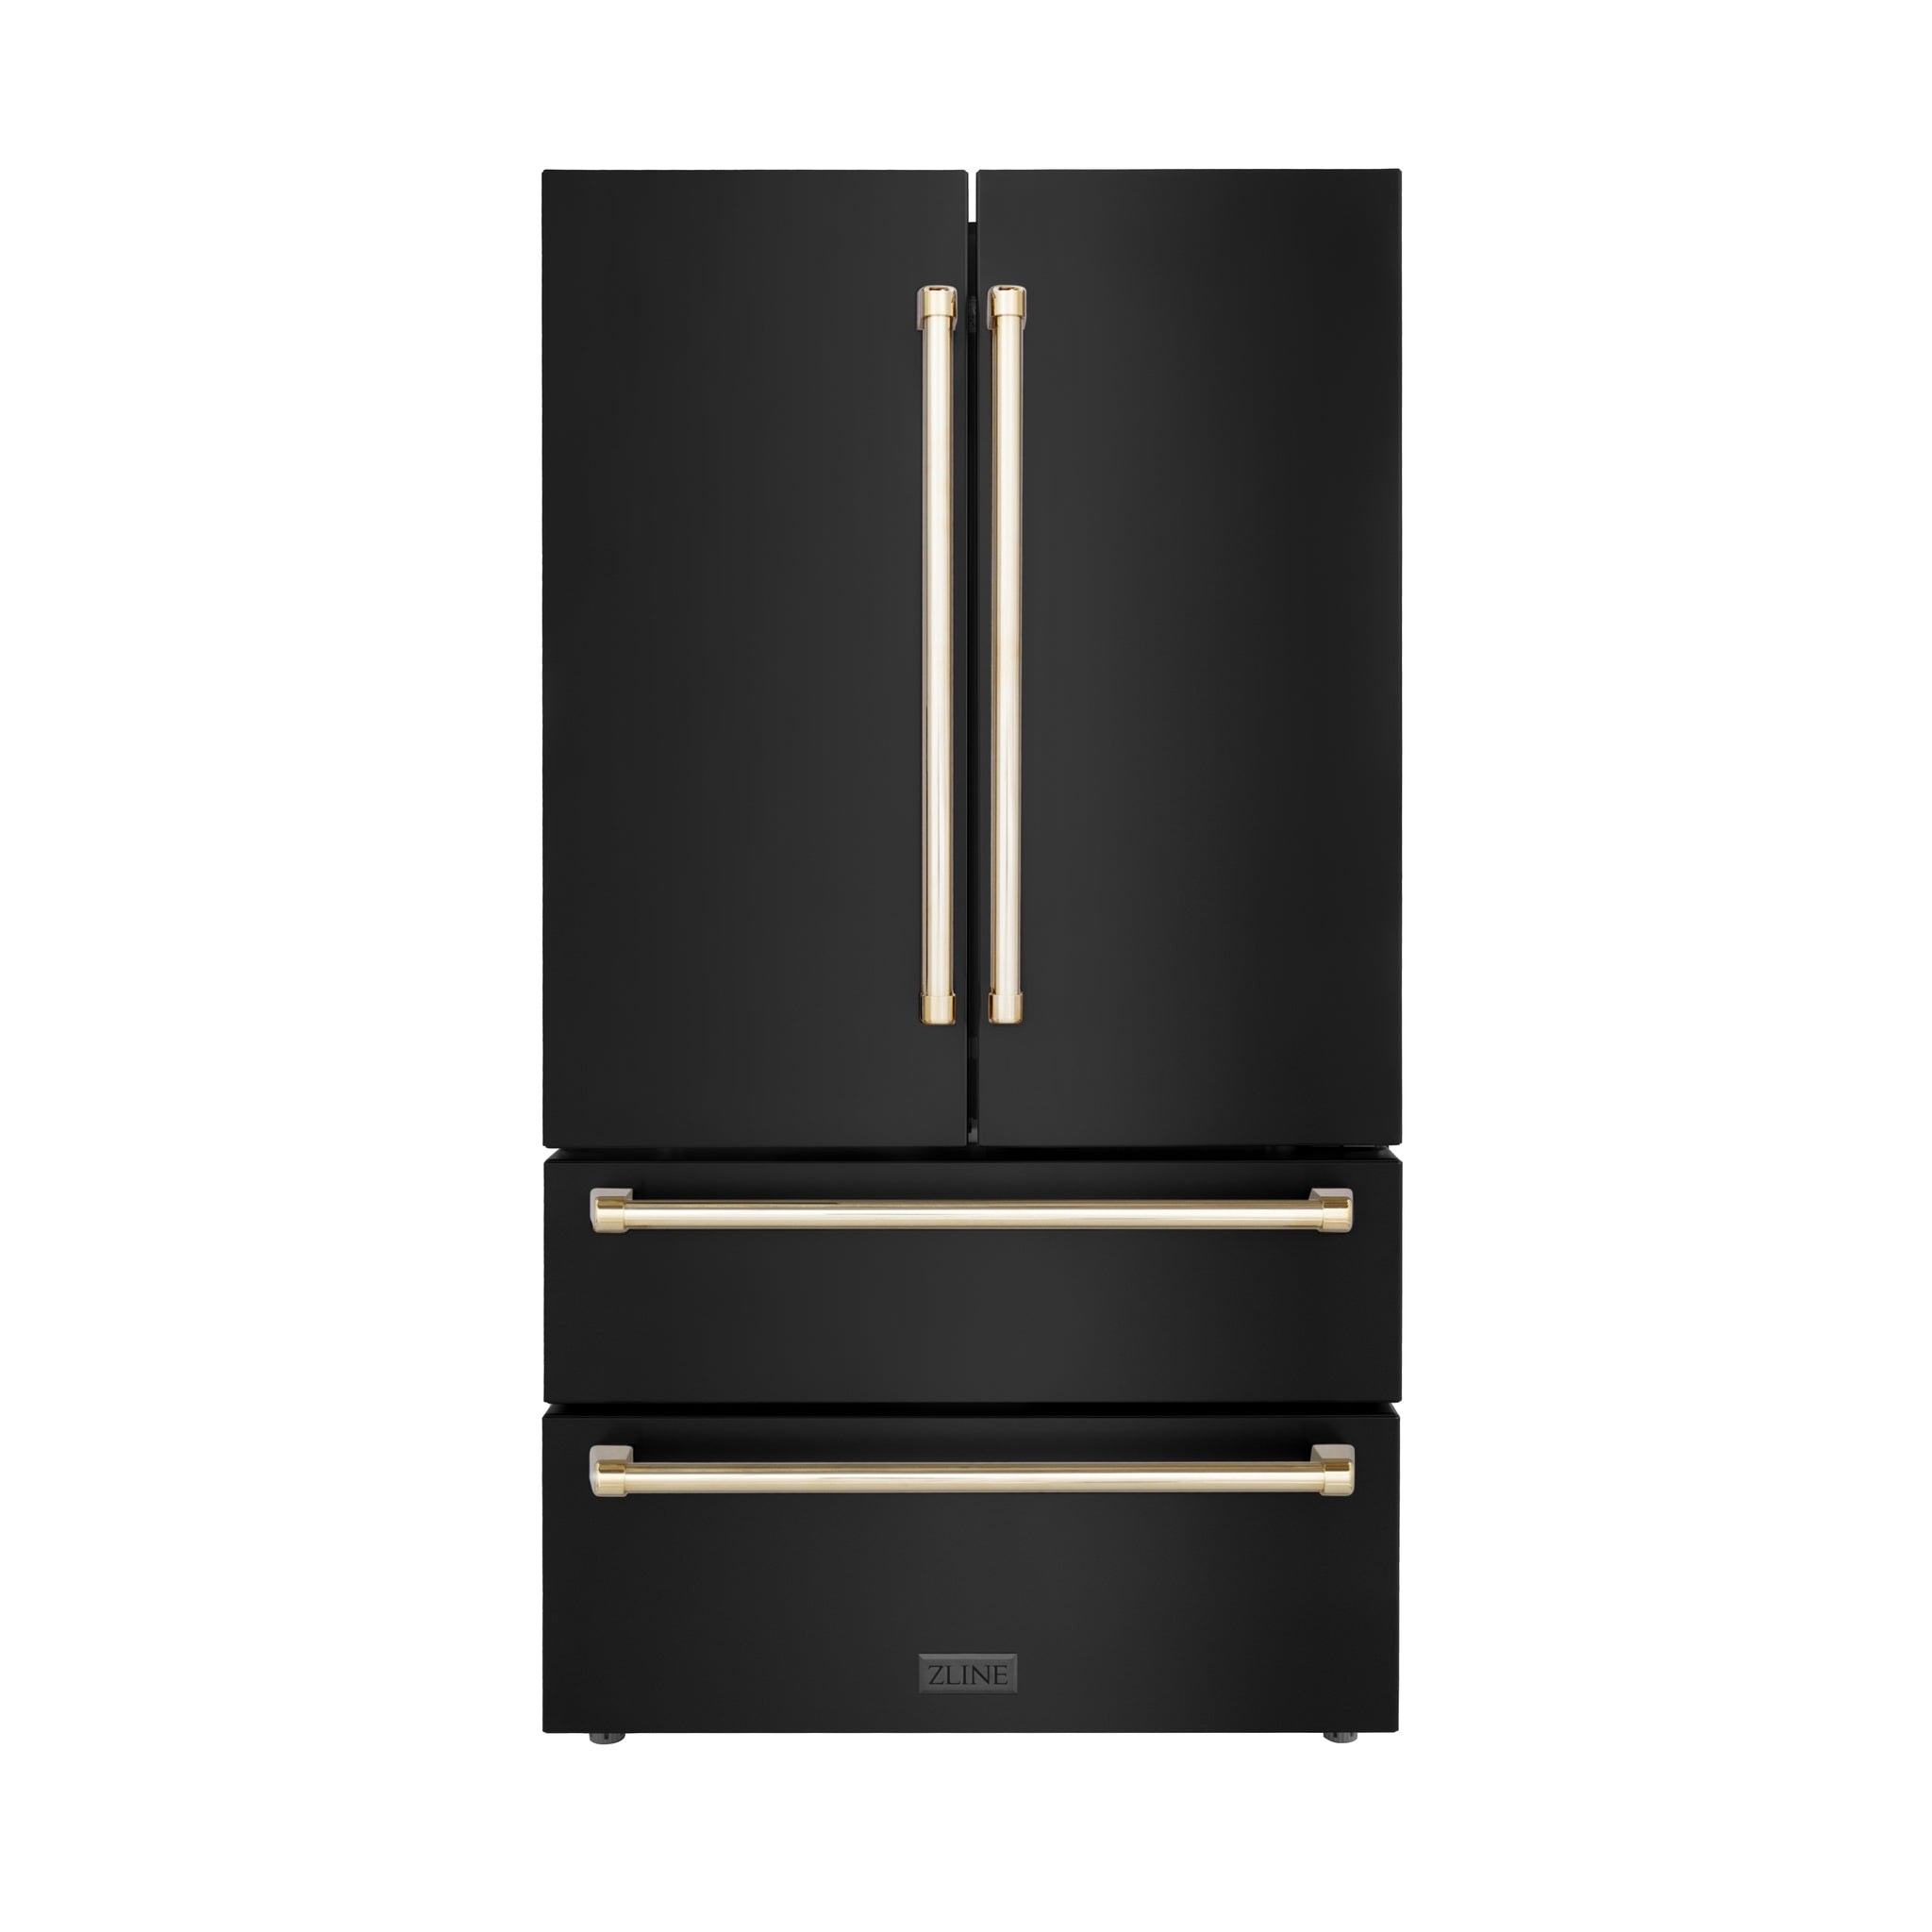 Zline Kitchen and Bath ZLINE 36" Autograph Edition Freestanding Refrigerator with Ice Maker in Black Stainless Steel with Accents Option 2